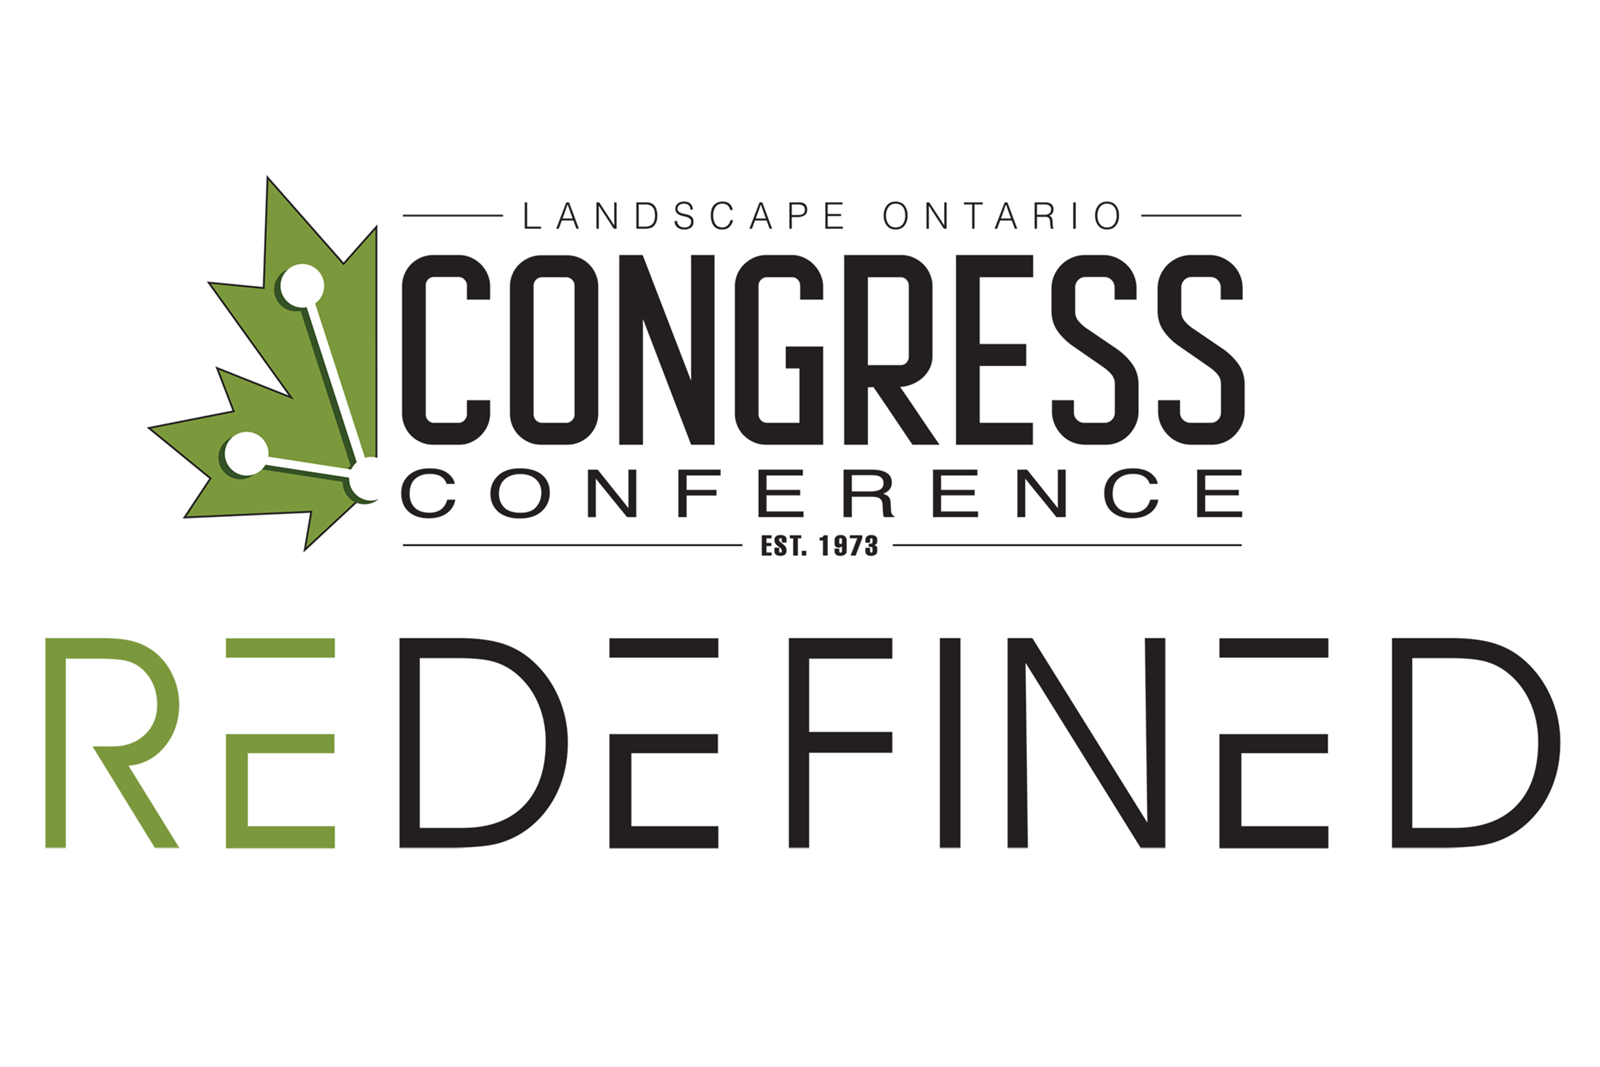 Here’s seven must-see seminars at Congress Conference